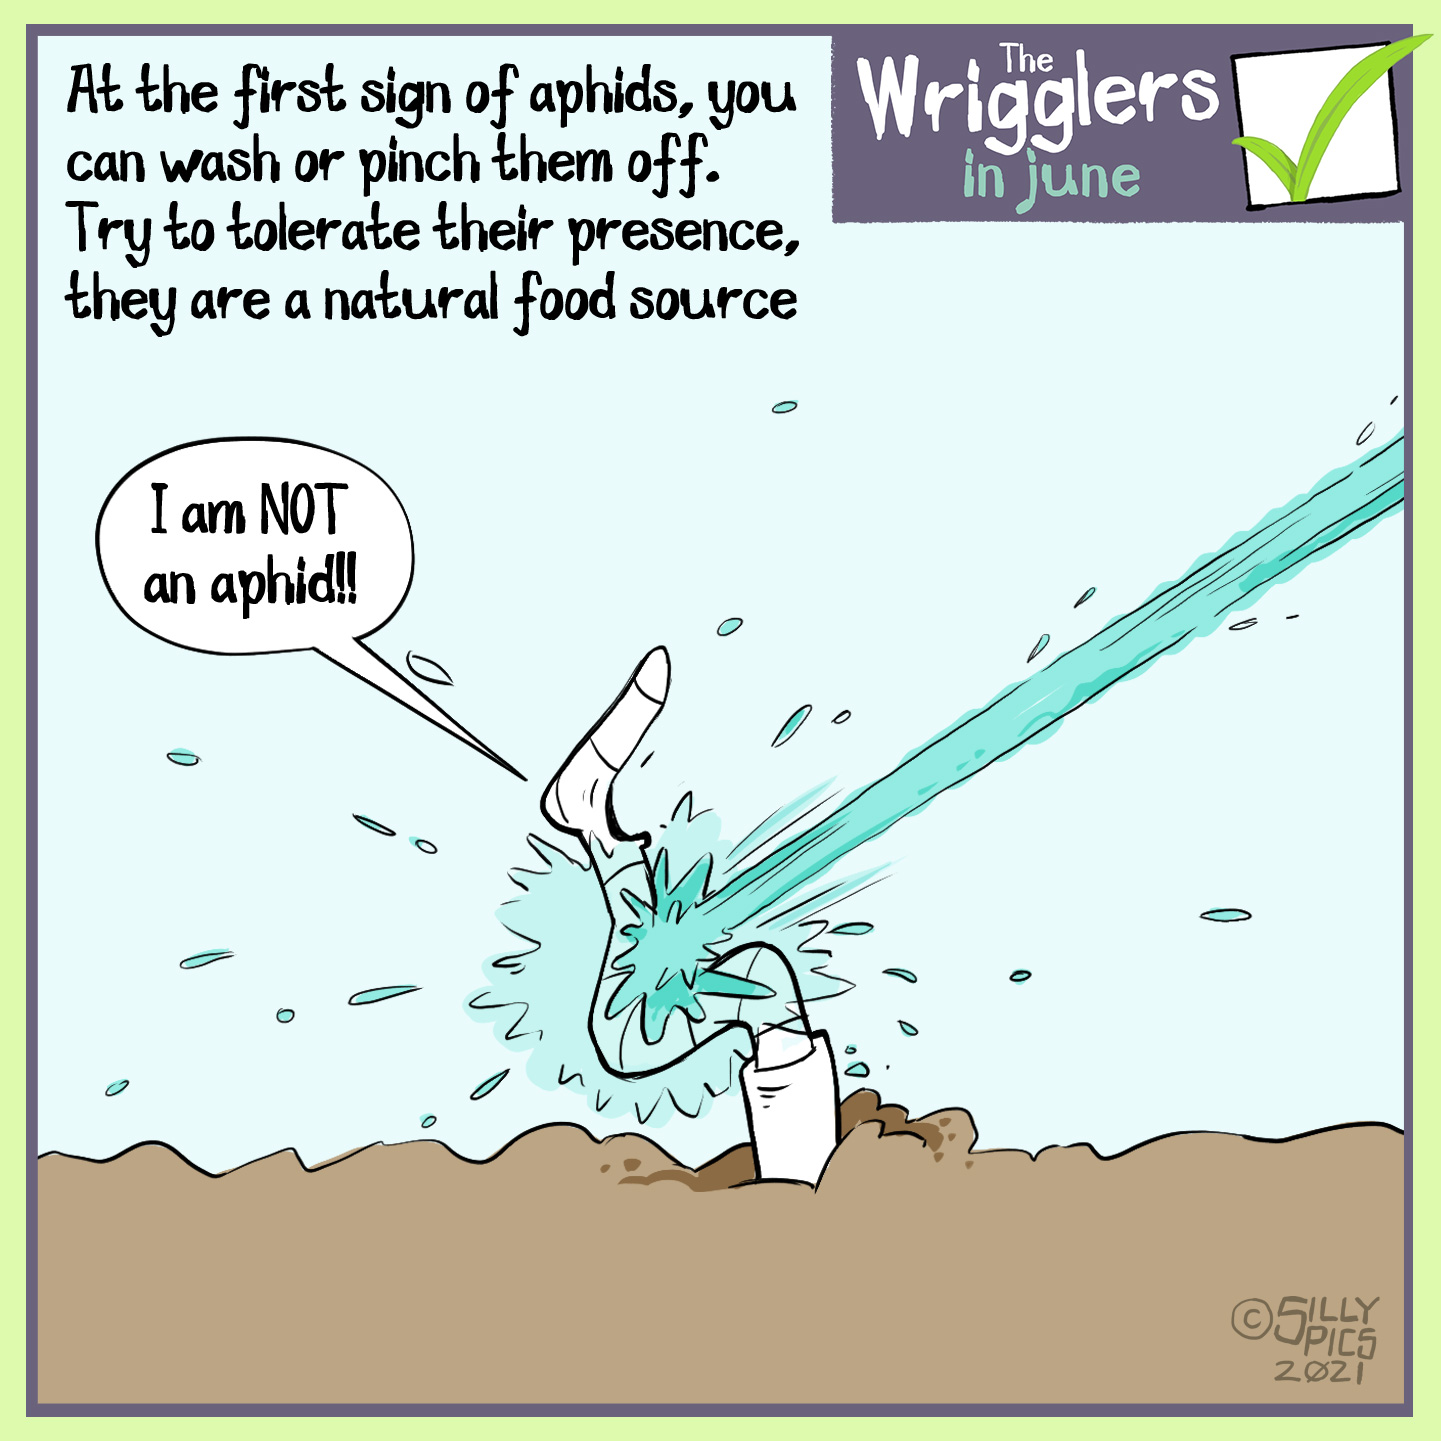 The cartoon headline says, “At the first sign of Aphids you can wash them or pinch them off. Try to tolerate their presence, they are a natural food source.” The cartoon is of a worm being sprayed by a jet of water, it says, “ I am NOT an Aphid!” #putpollinatorsfirst